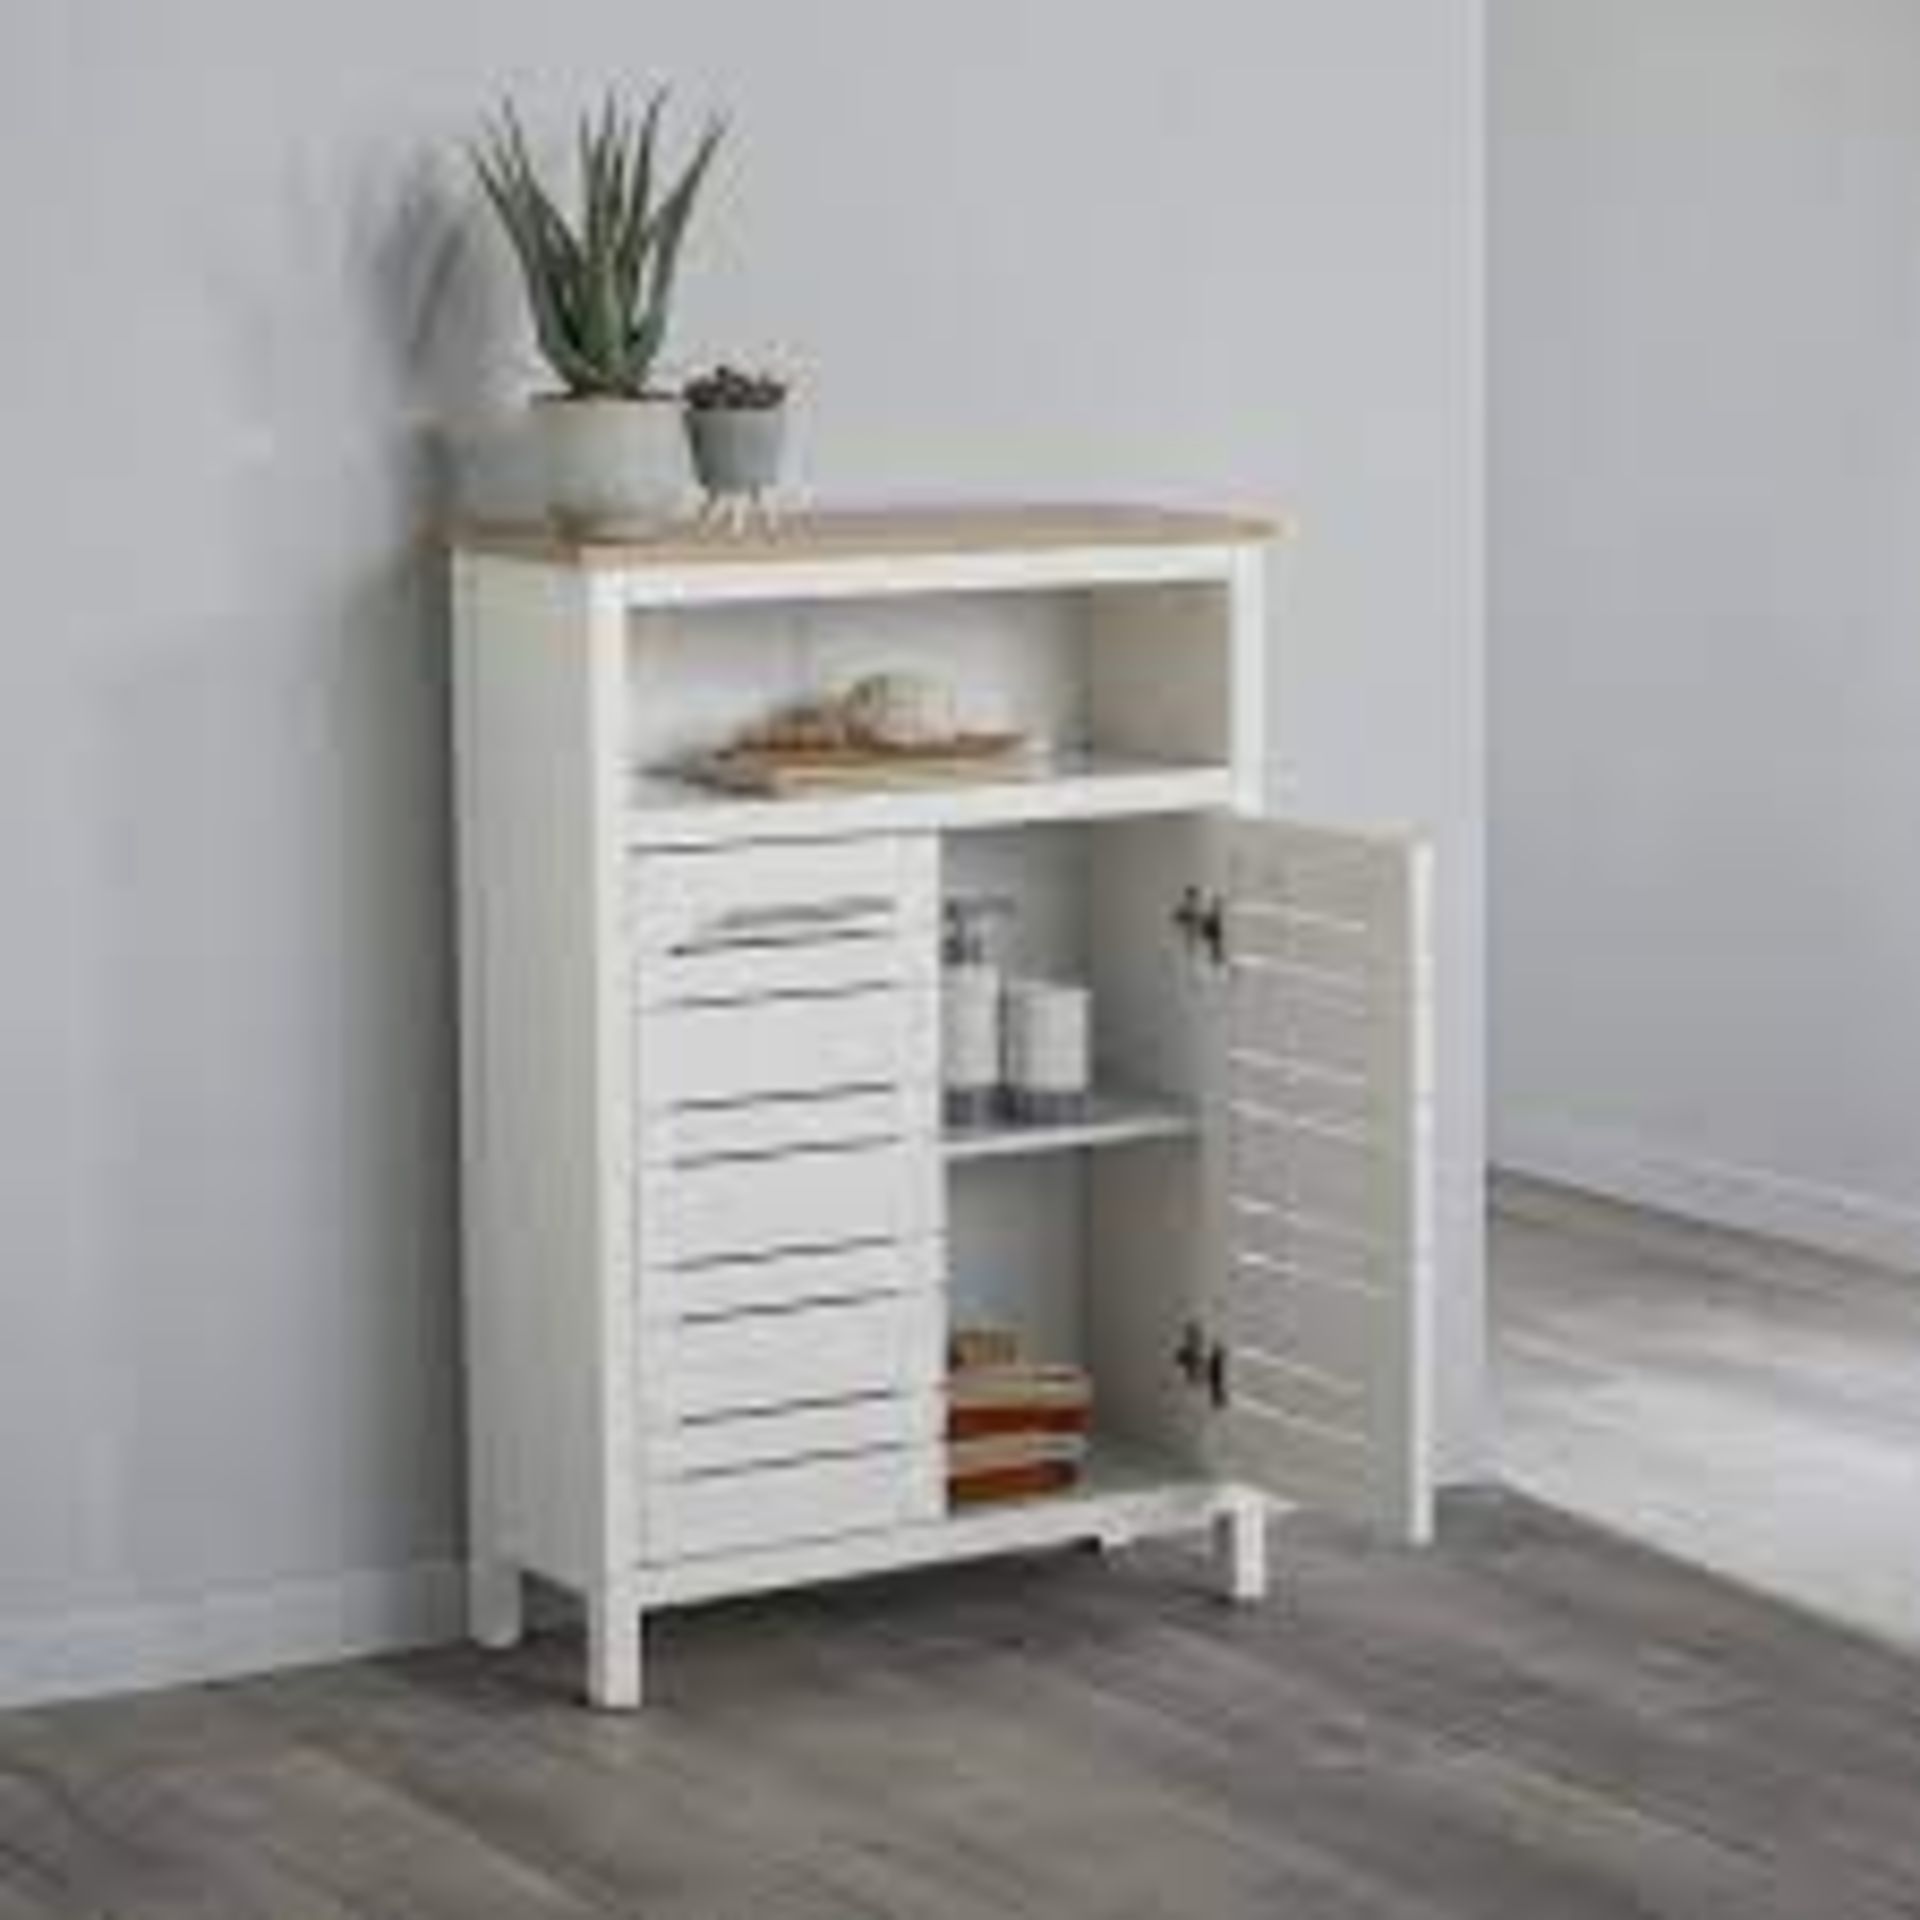 NEW BOXED Hertford Two-Tone White Double Door Storage Unit. The Two-Toned Bathroom Console Cabinet